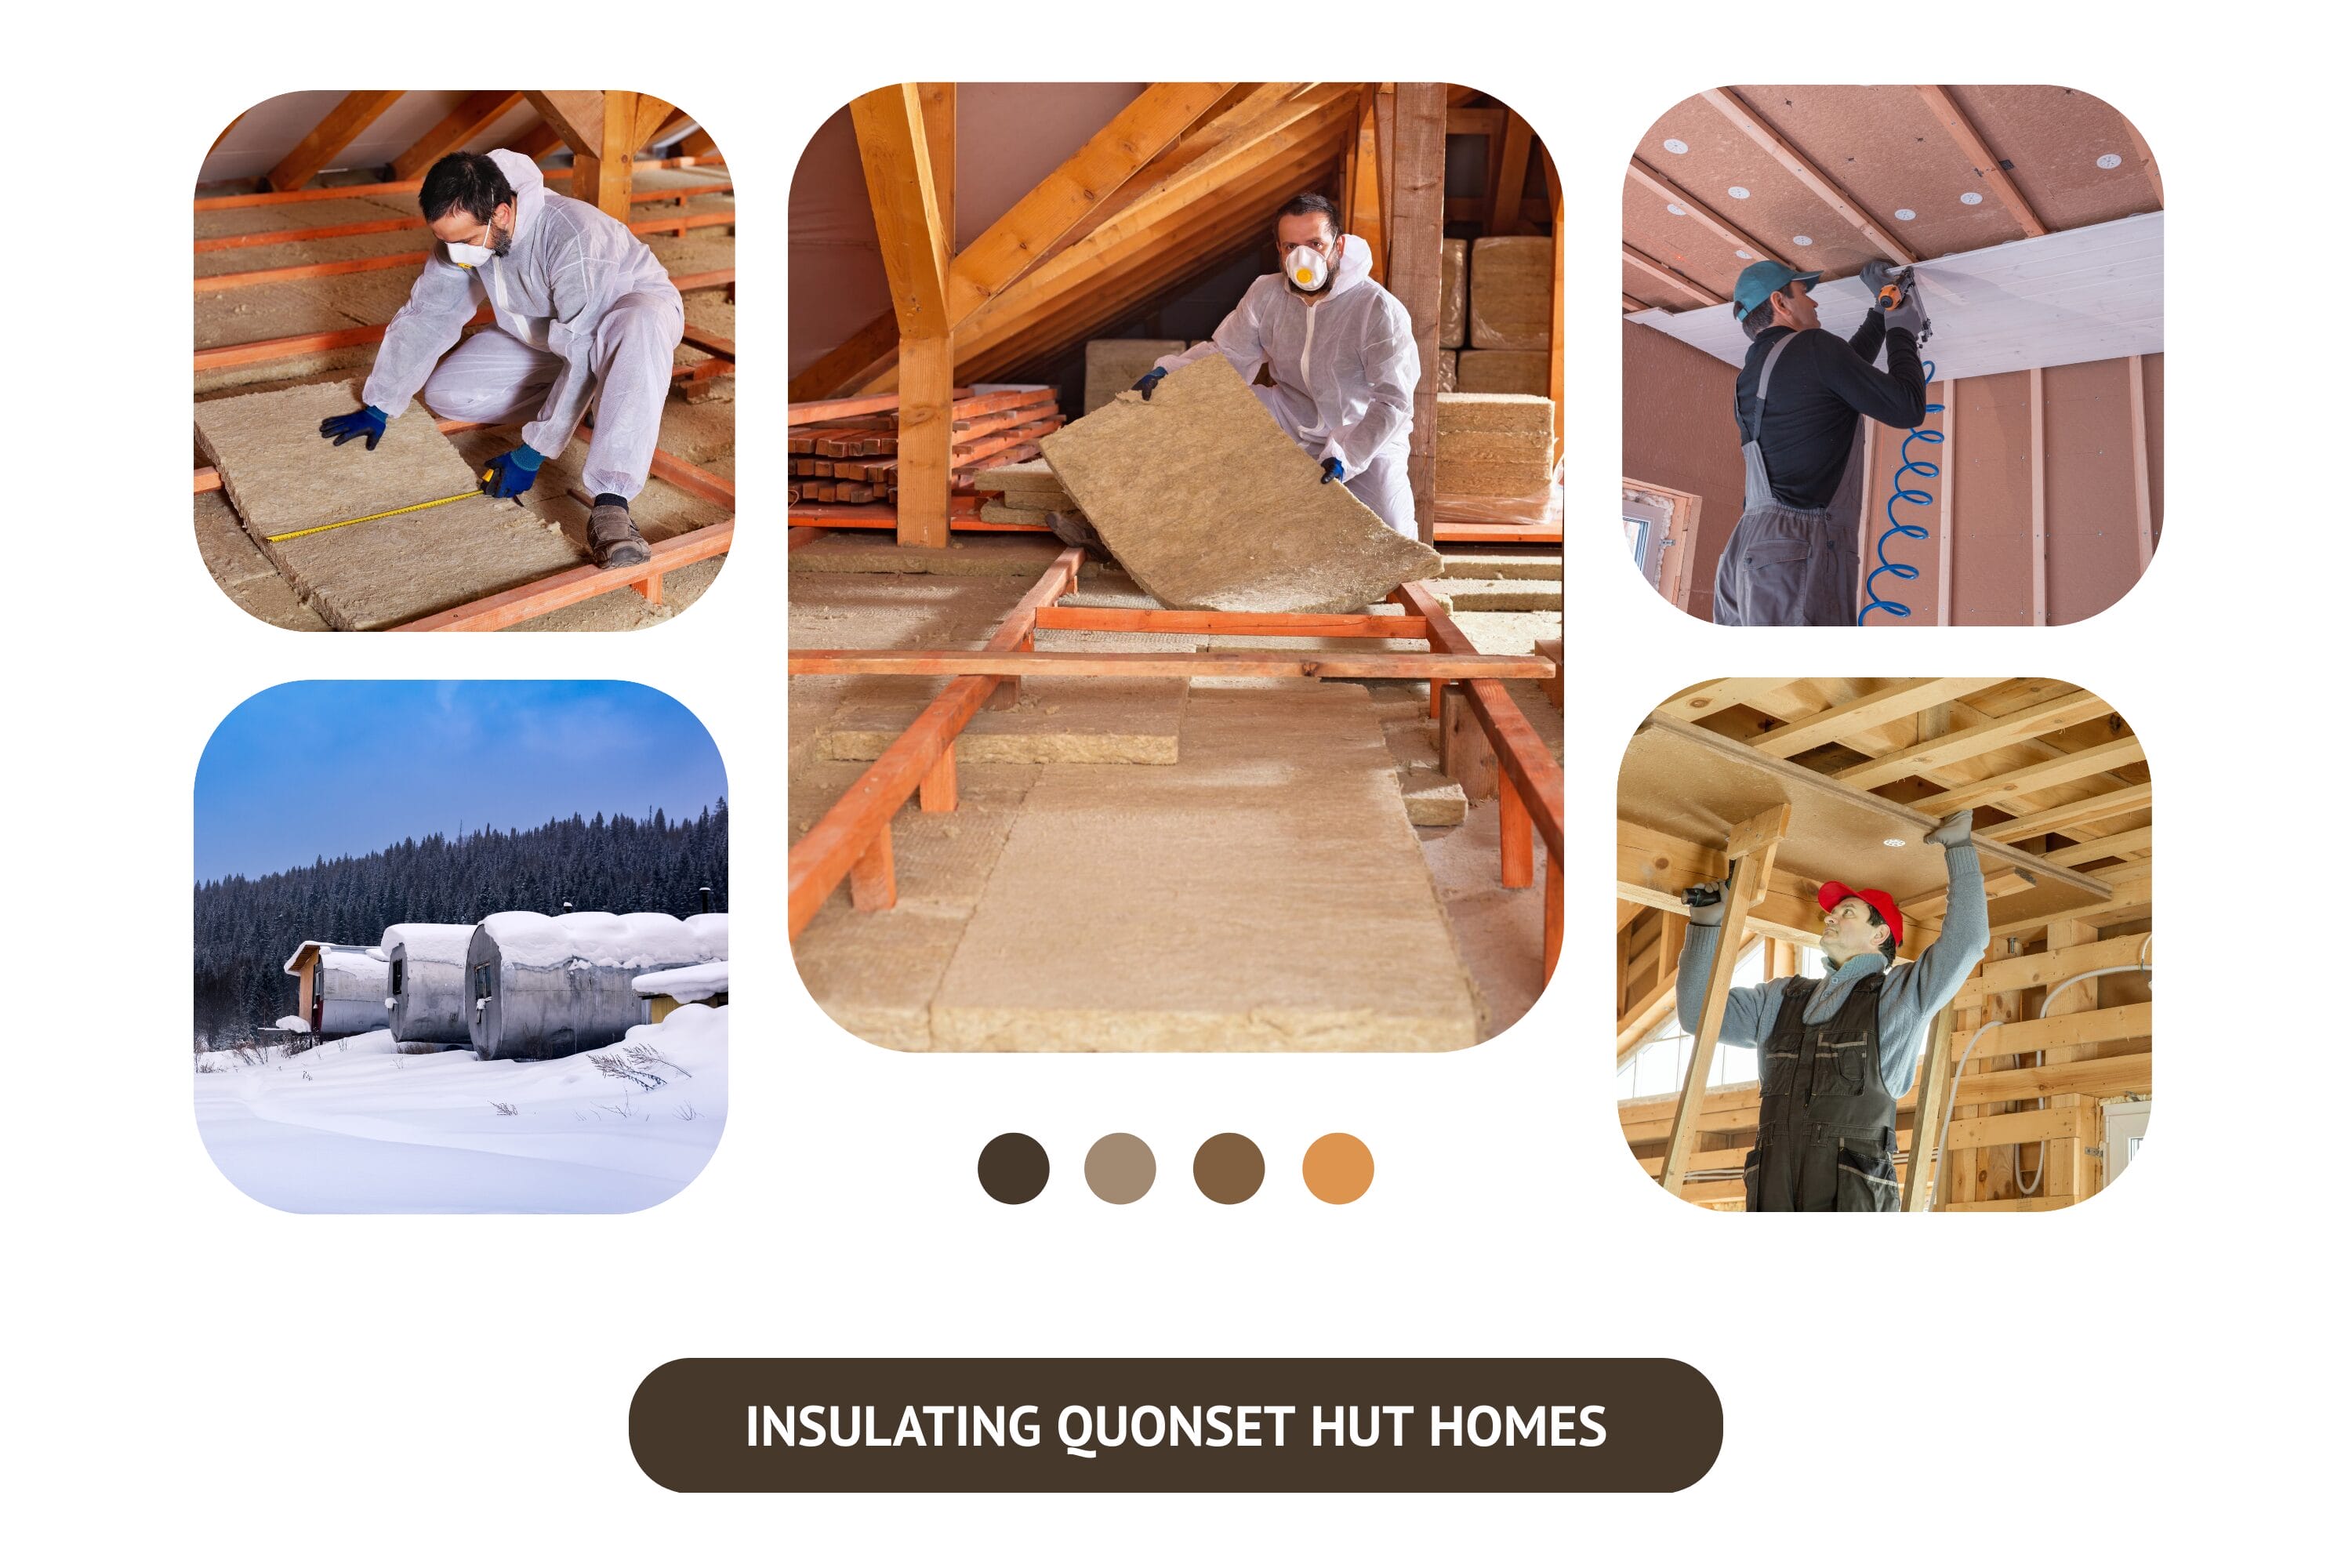 Quonset hut homes with proper insulation.